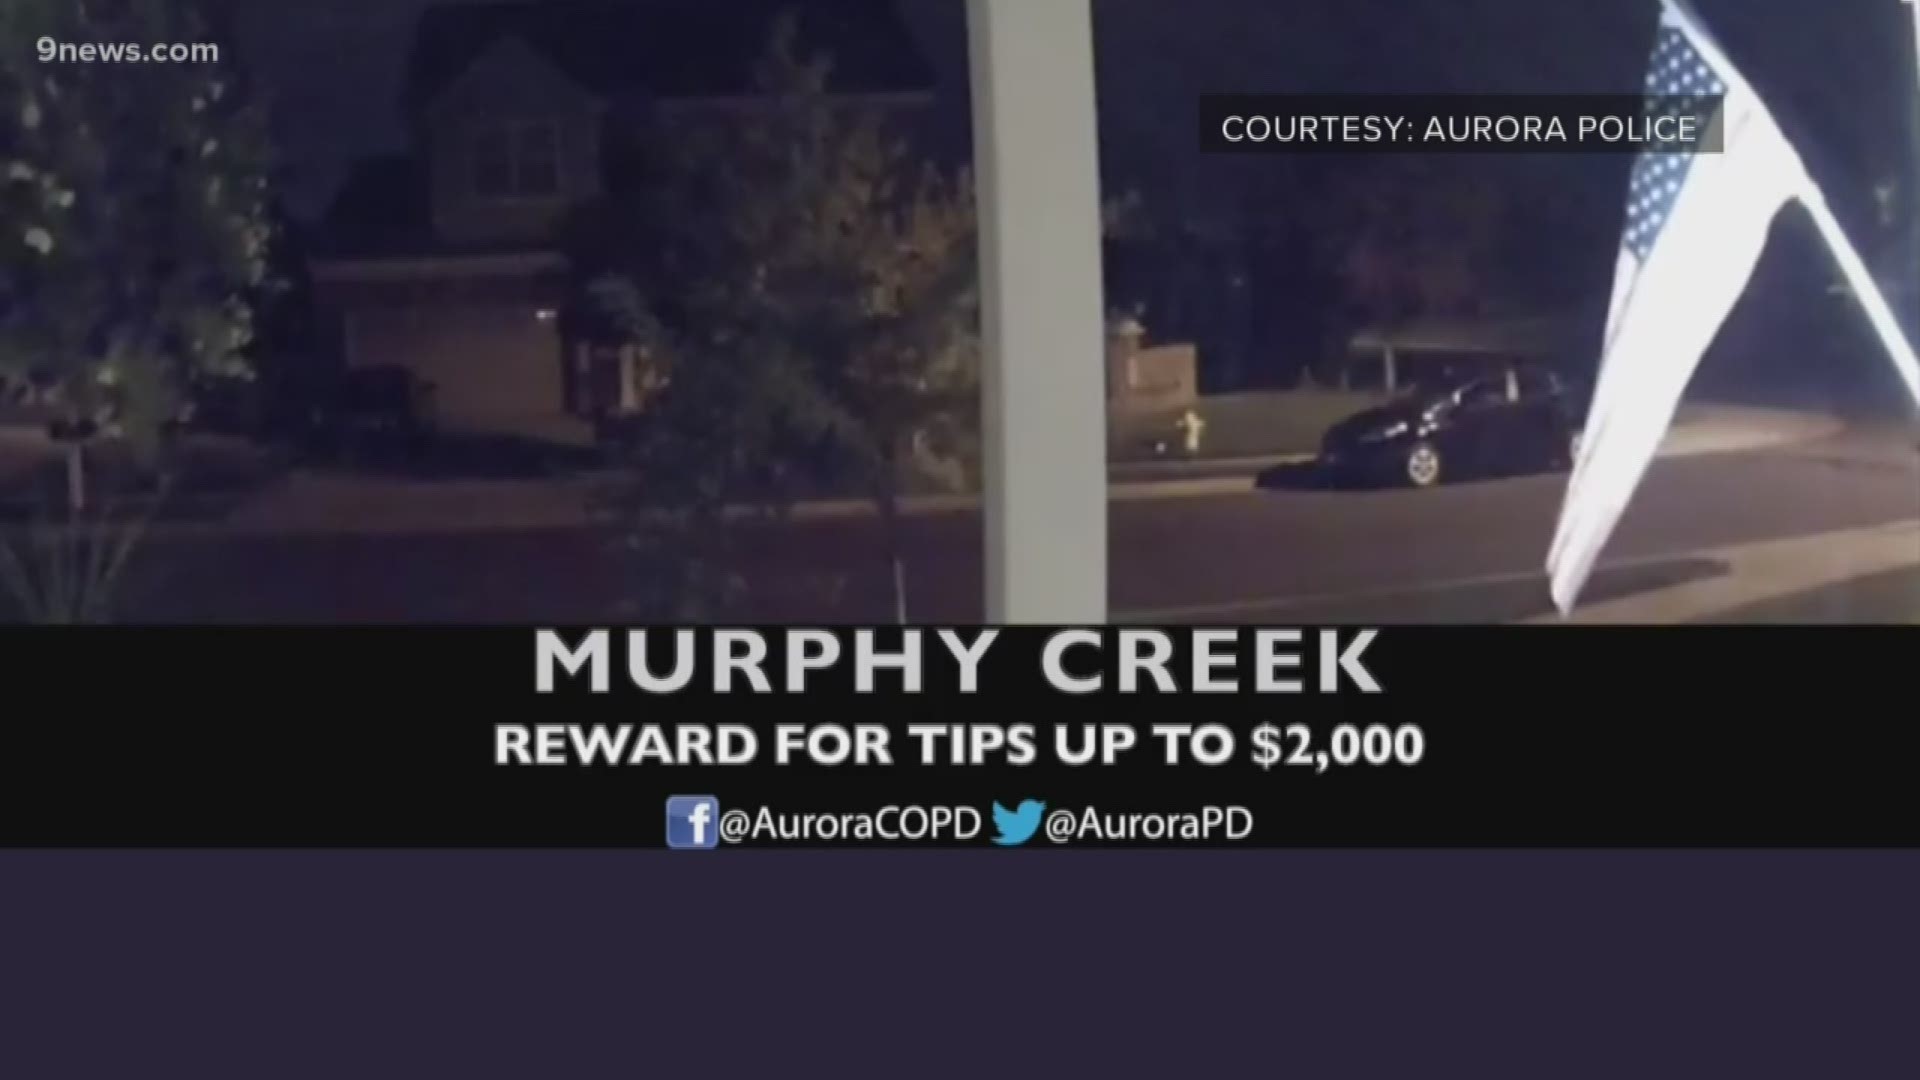 Residents of the Murphy Creek subdivision have been told to take precautions following 6 car thefts.